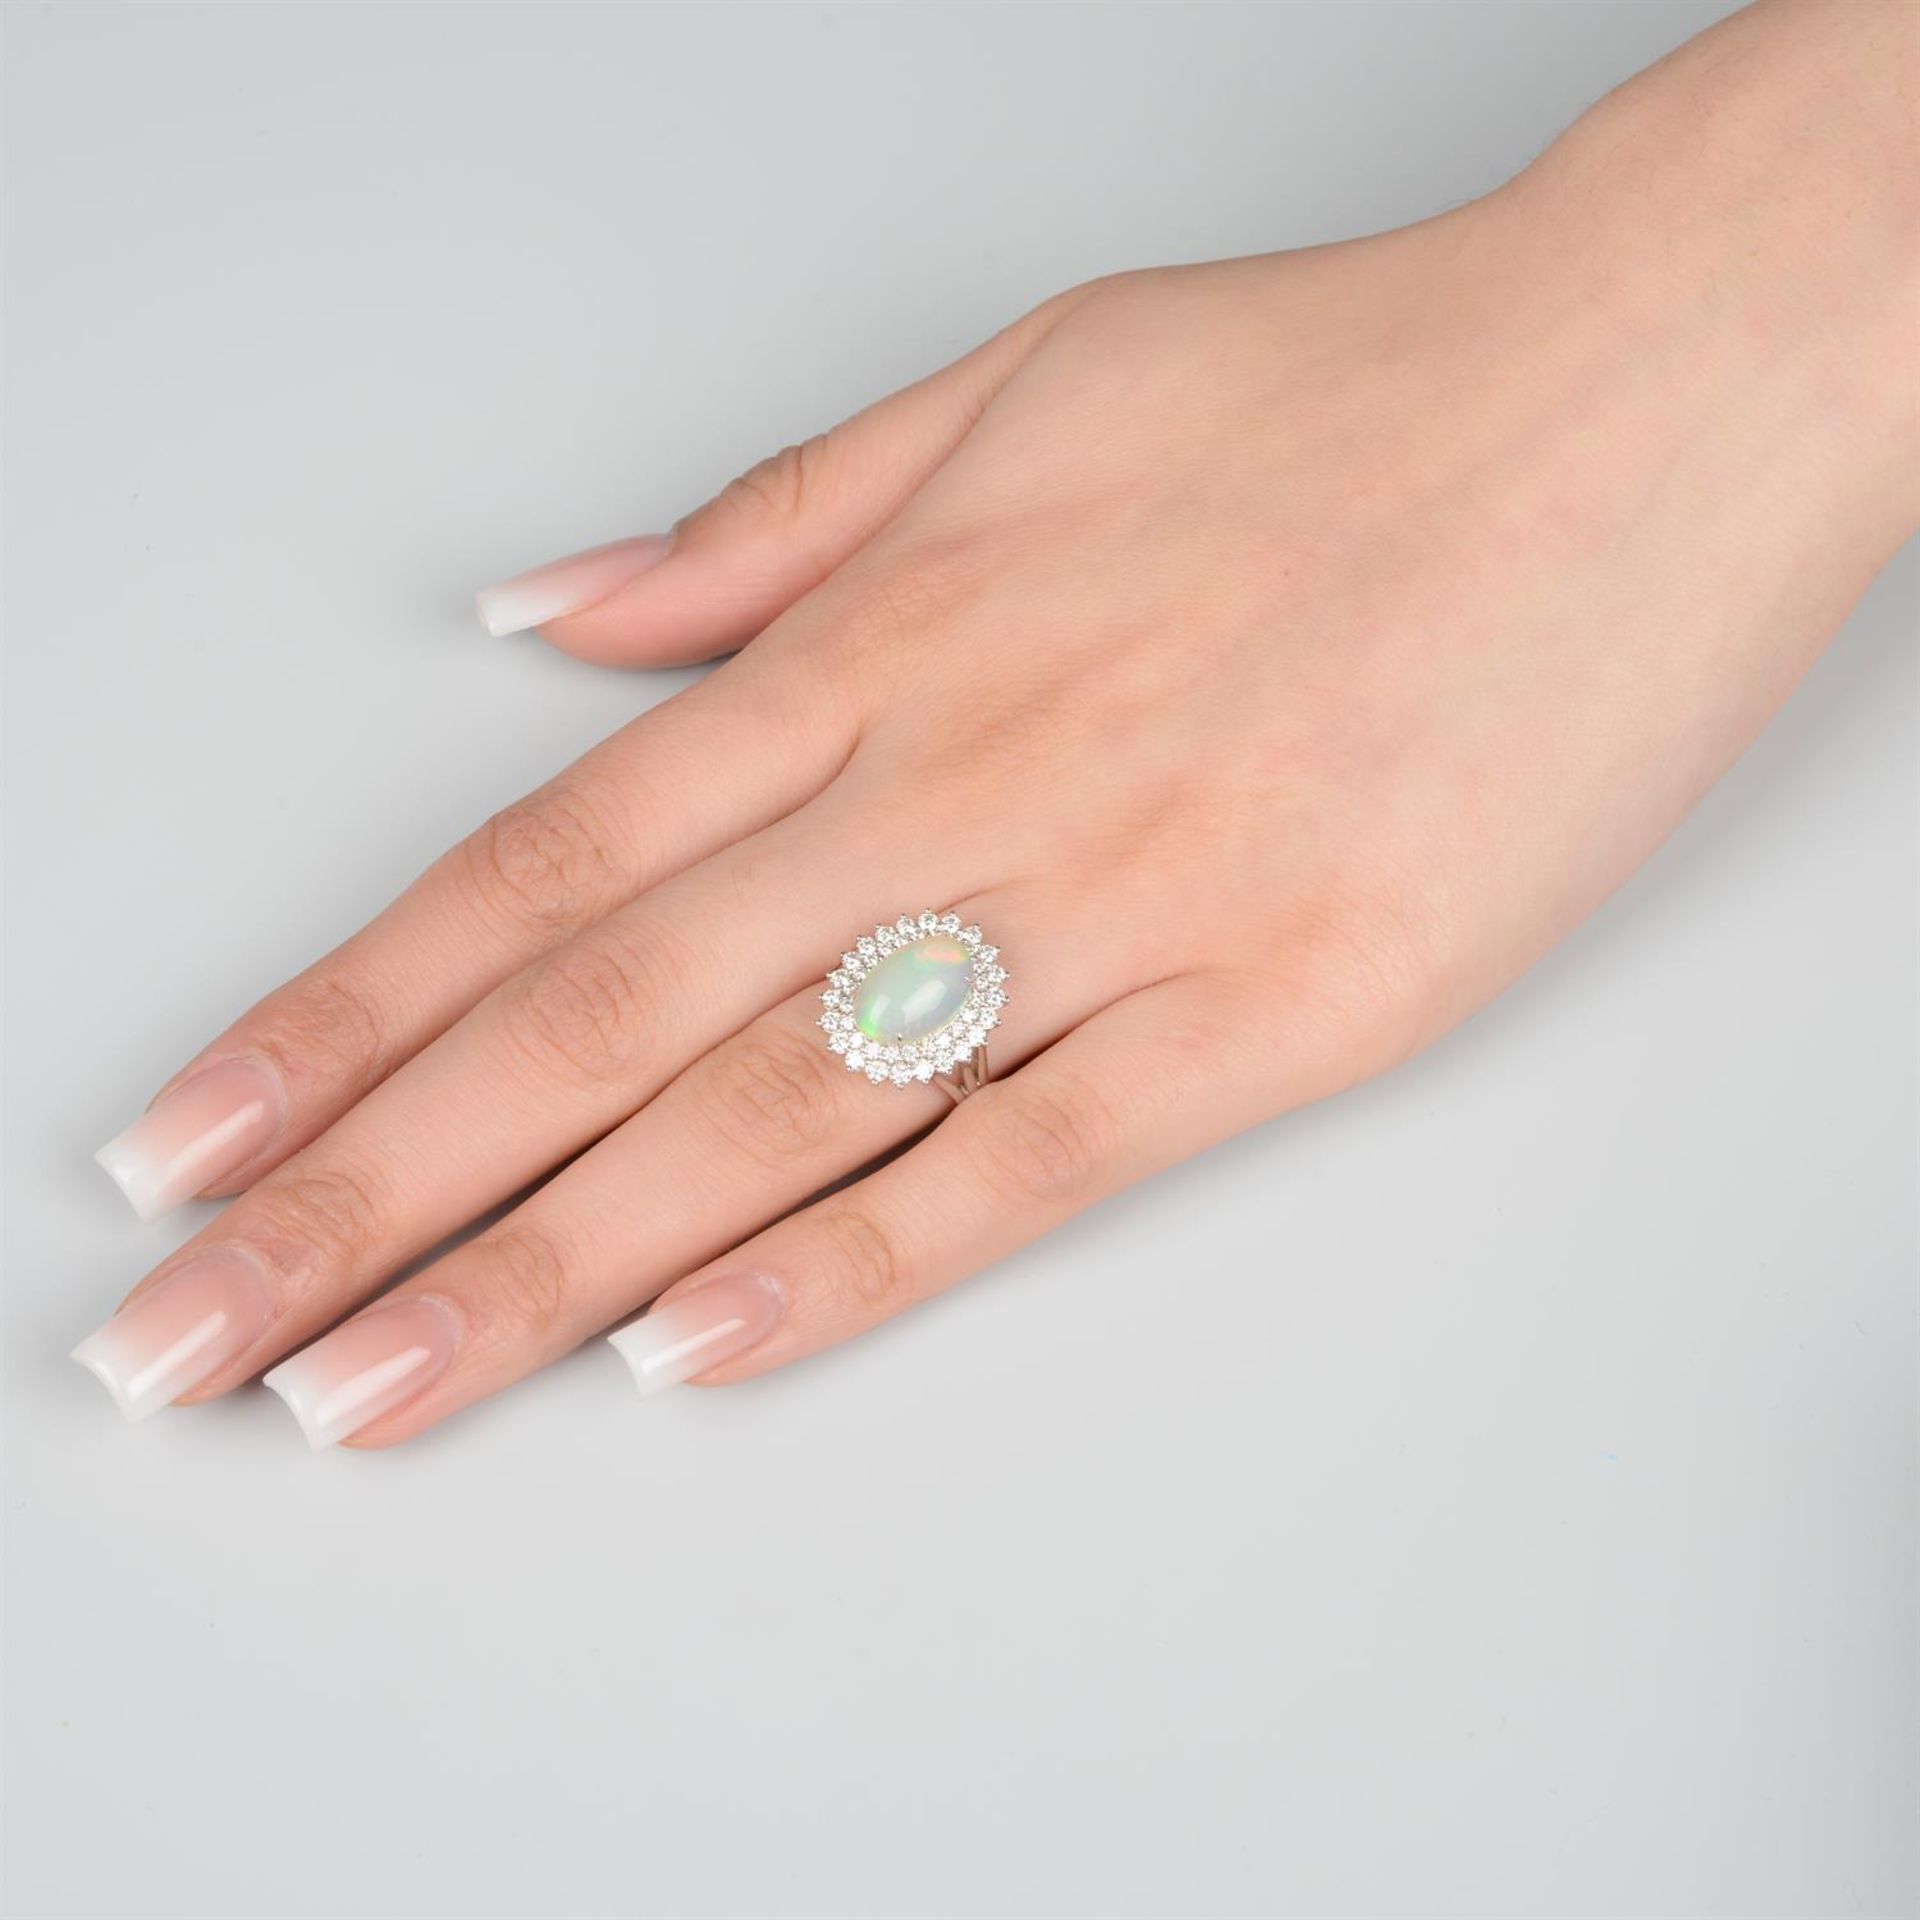 Opal and diamond ring - Image 5 of 5